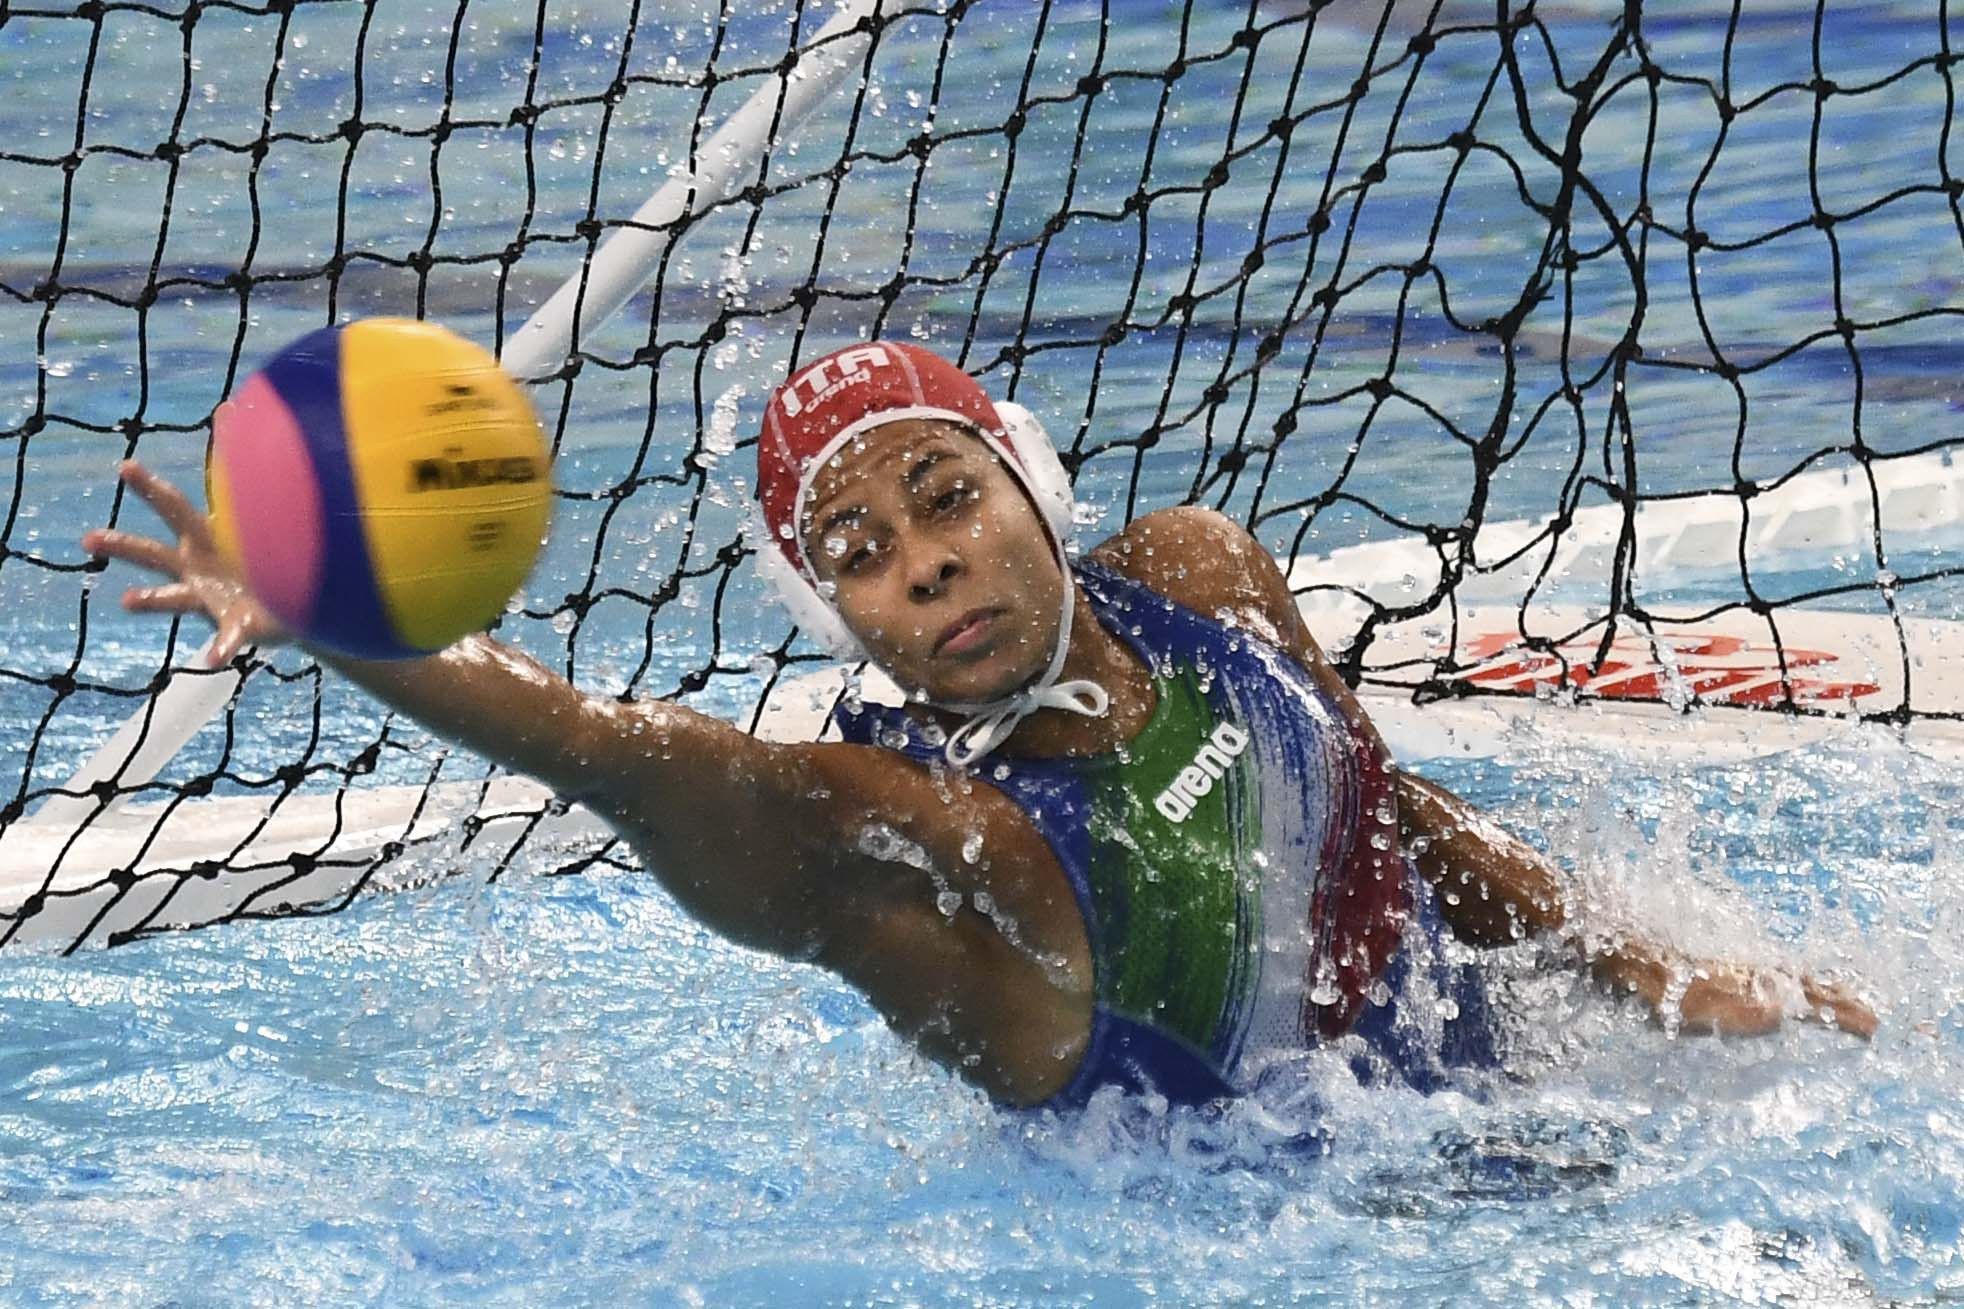 There were plenty of thrills and spills at the women's water polo at Piscina Scandone ©Naples 2019